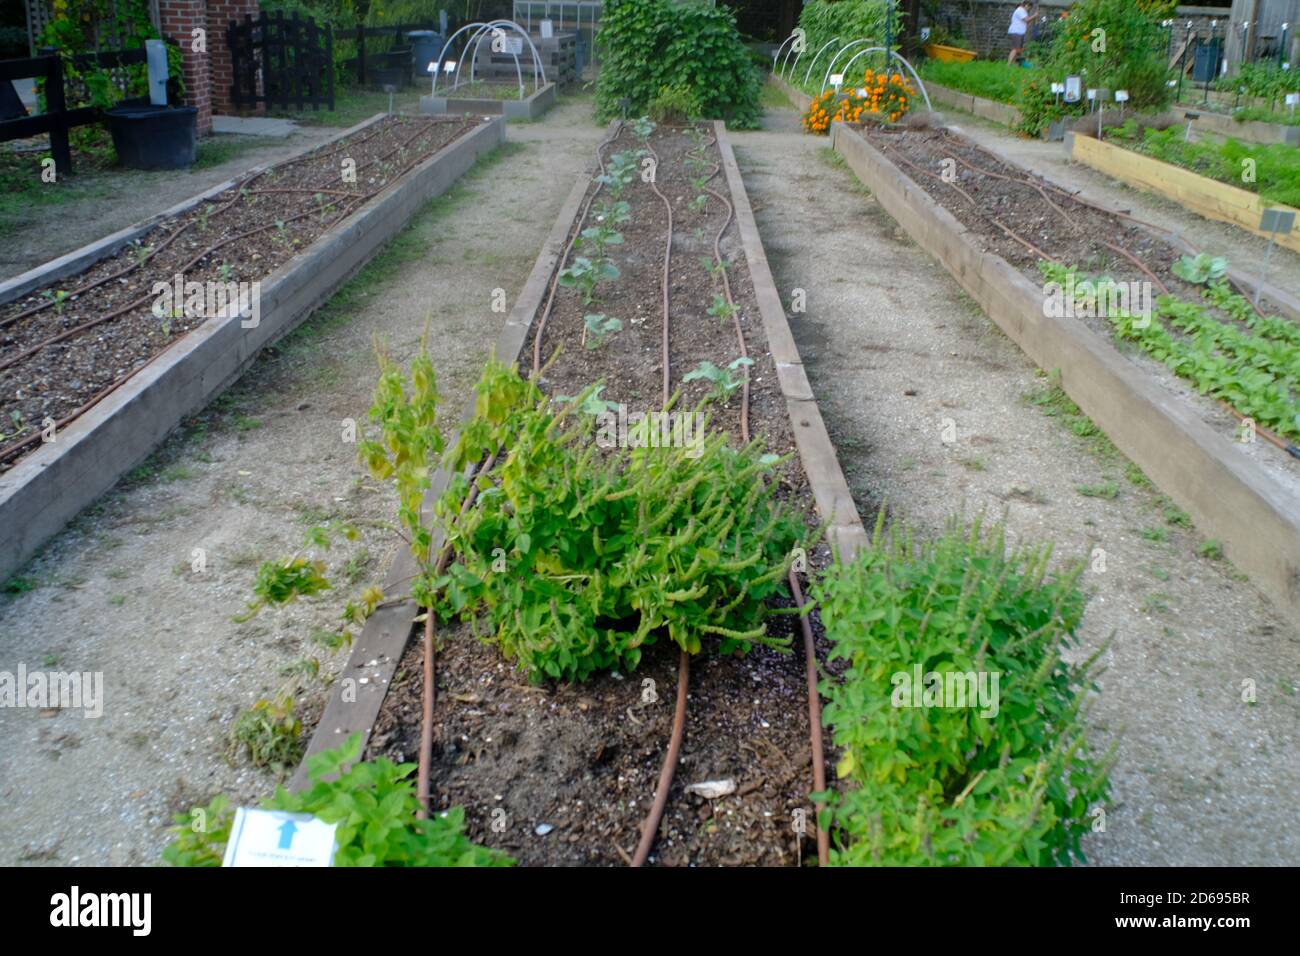 Urban Garden, Denmark Vesey, Produce, Flowers, Halloween, Decorations, Garden Paths, and More! Stock Photo